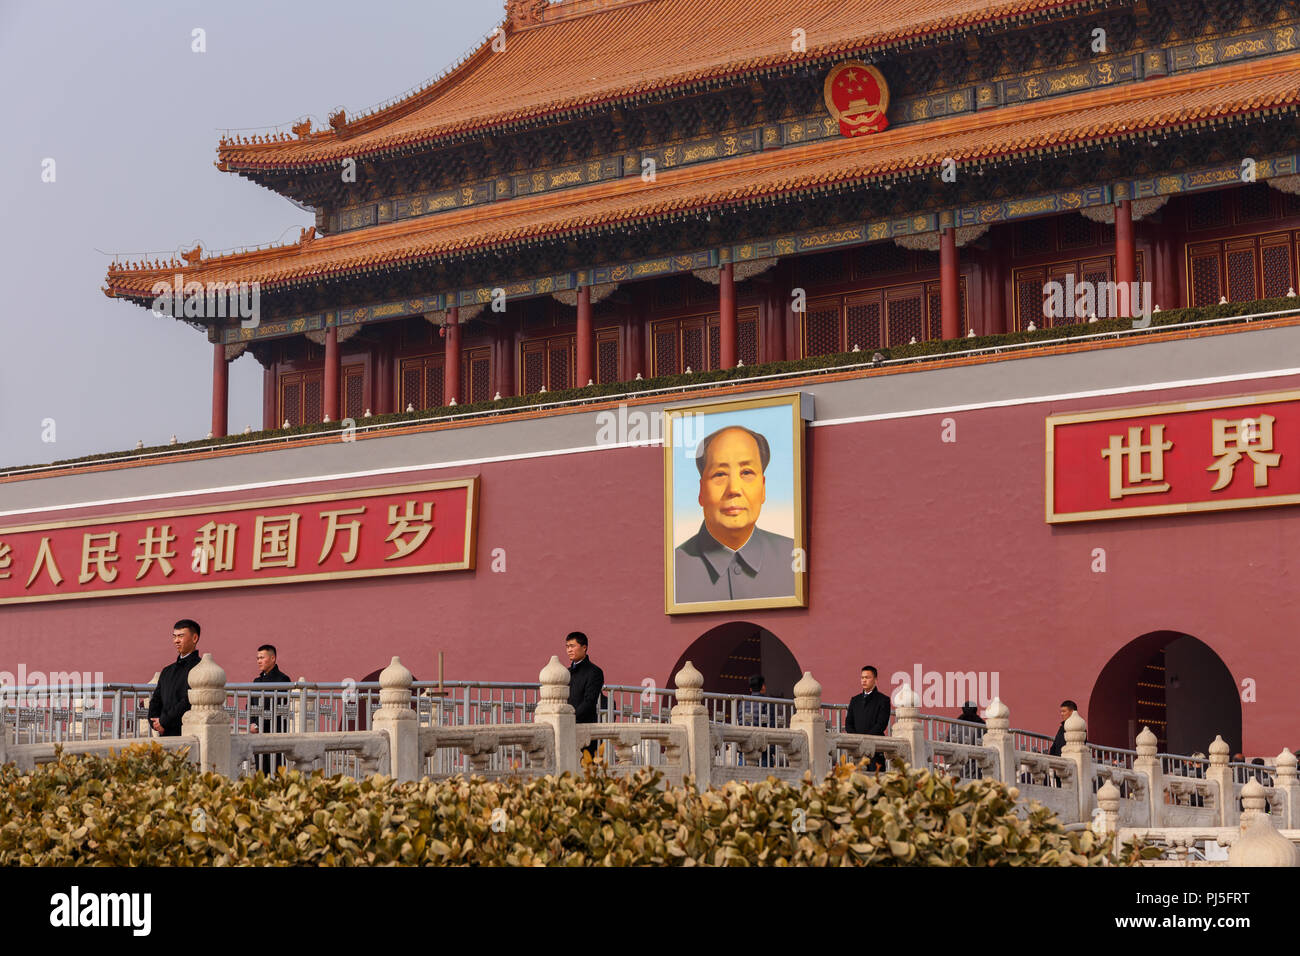 View of Tiananmen Gate, the entrance to the imperial palace at the Forbiddan City in Beijing, China. Stock Photo